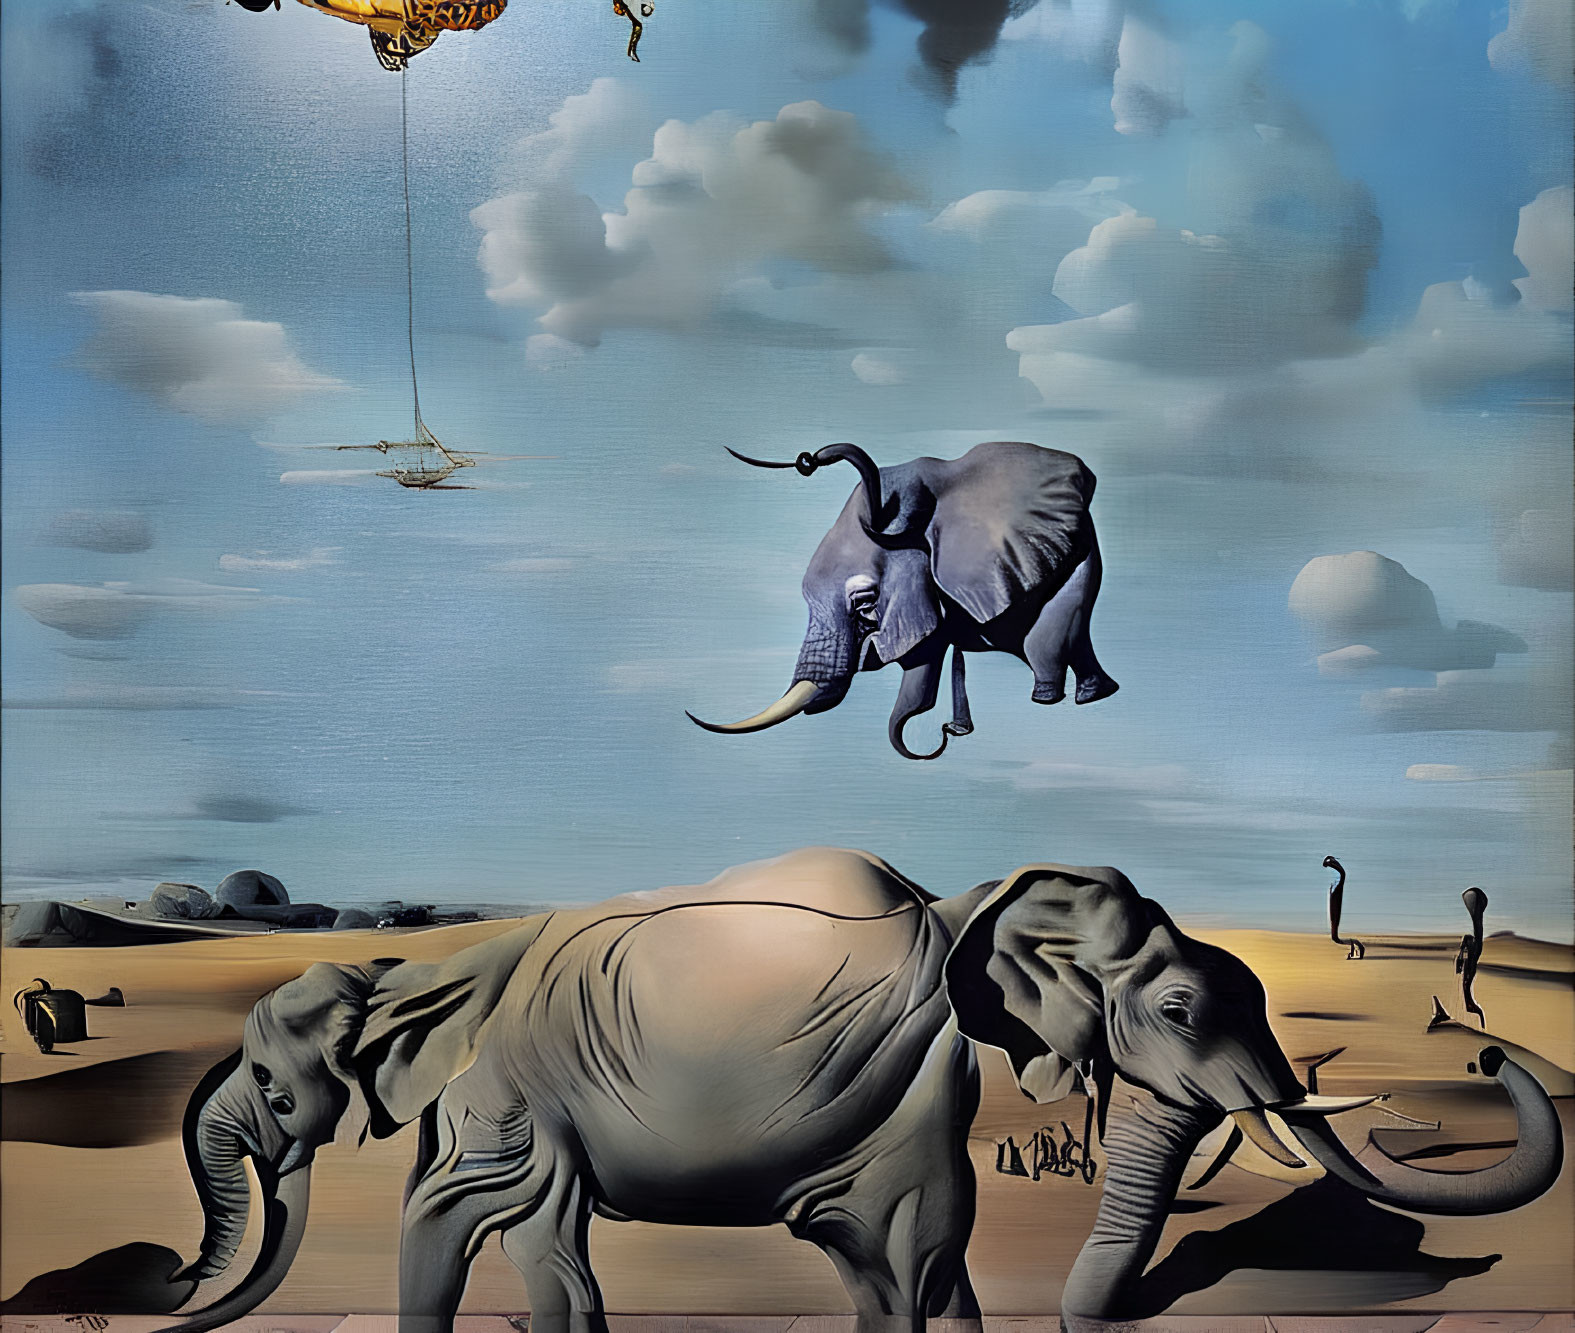 Surreal painting of floating and grounded elephants under cloudy sky